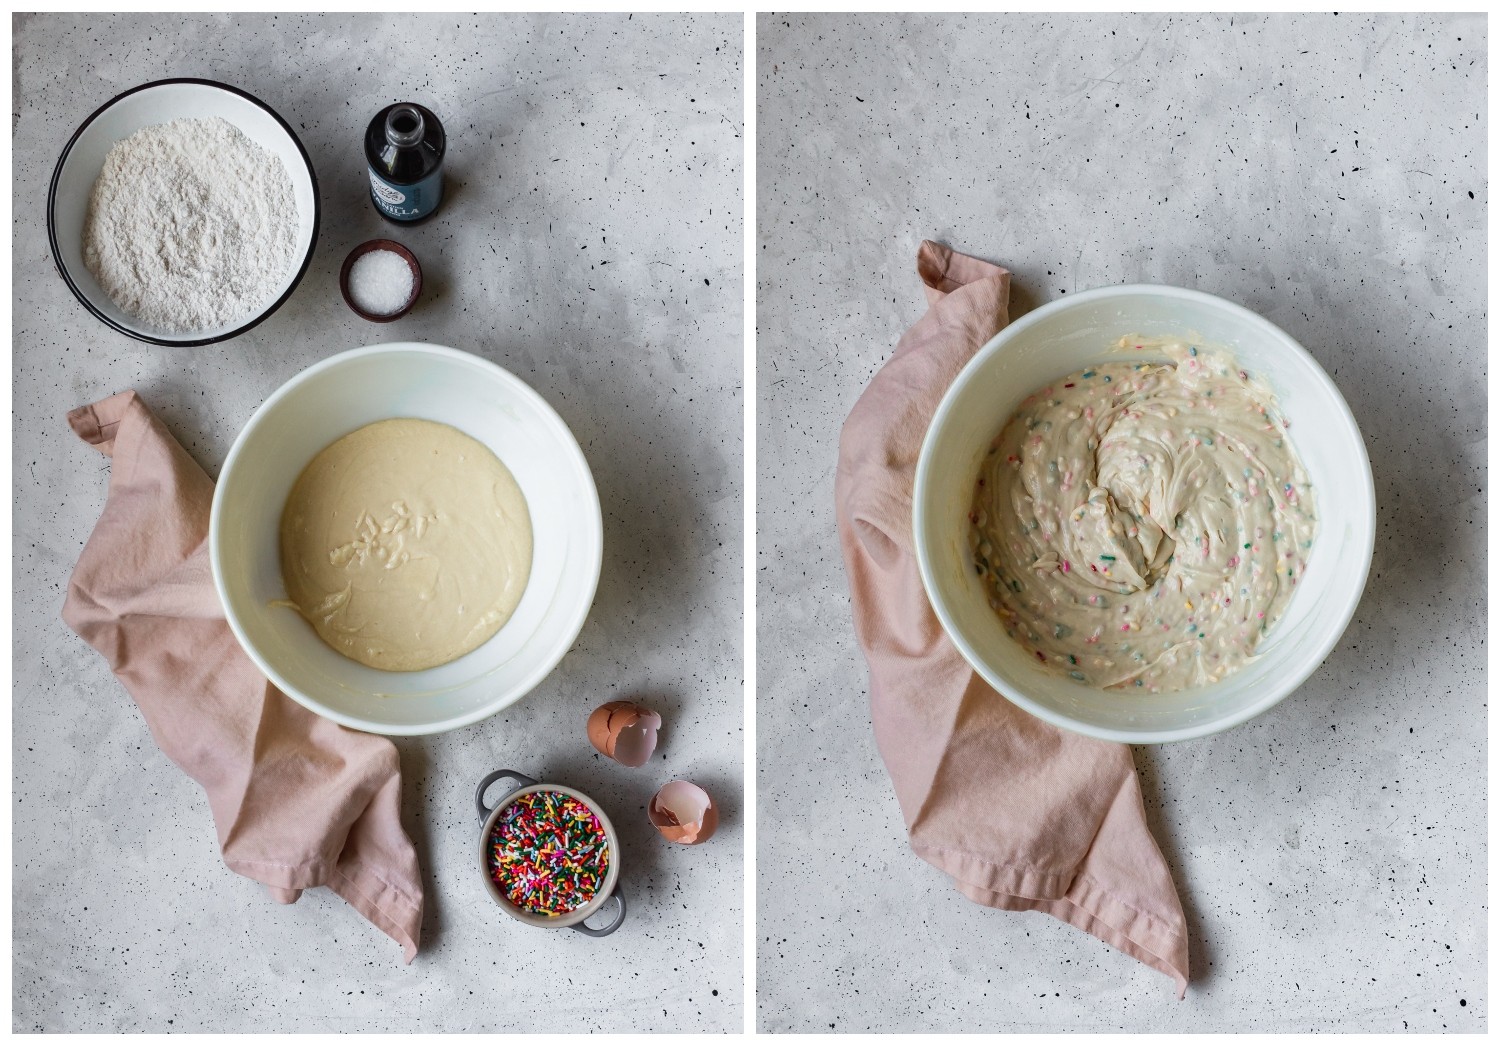 Two pictures of a bowl of cake batter on a grey background next to a pink towel. In the first photo, there are cake ingredients surrounding the bowl. In the second photo, the cake batter is prepared.